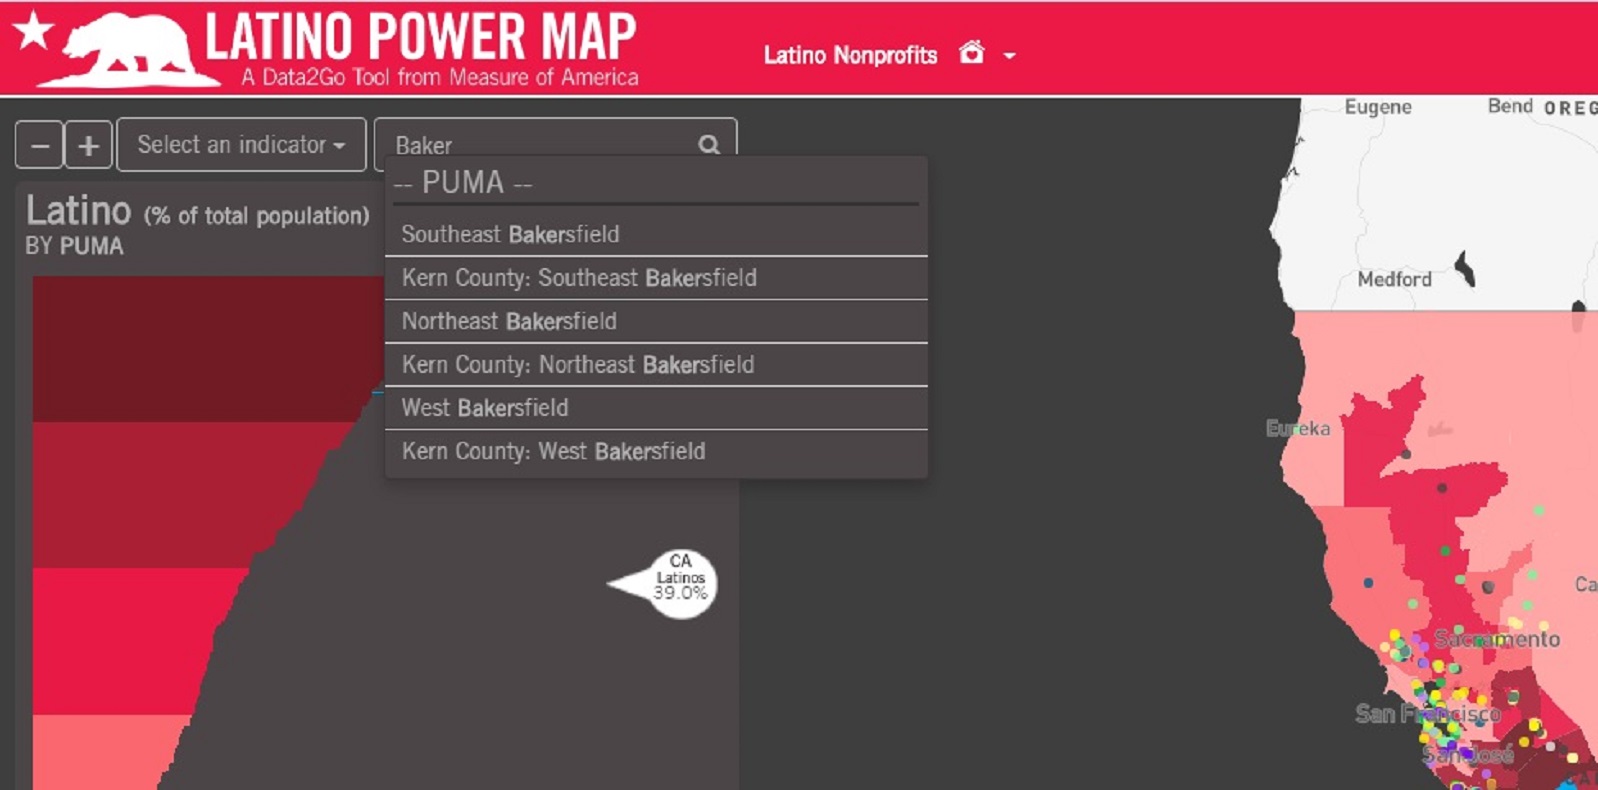 California Latino Power Map's Type-ahead Search Functionality